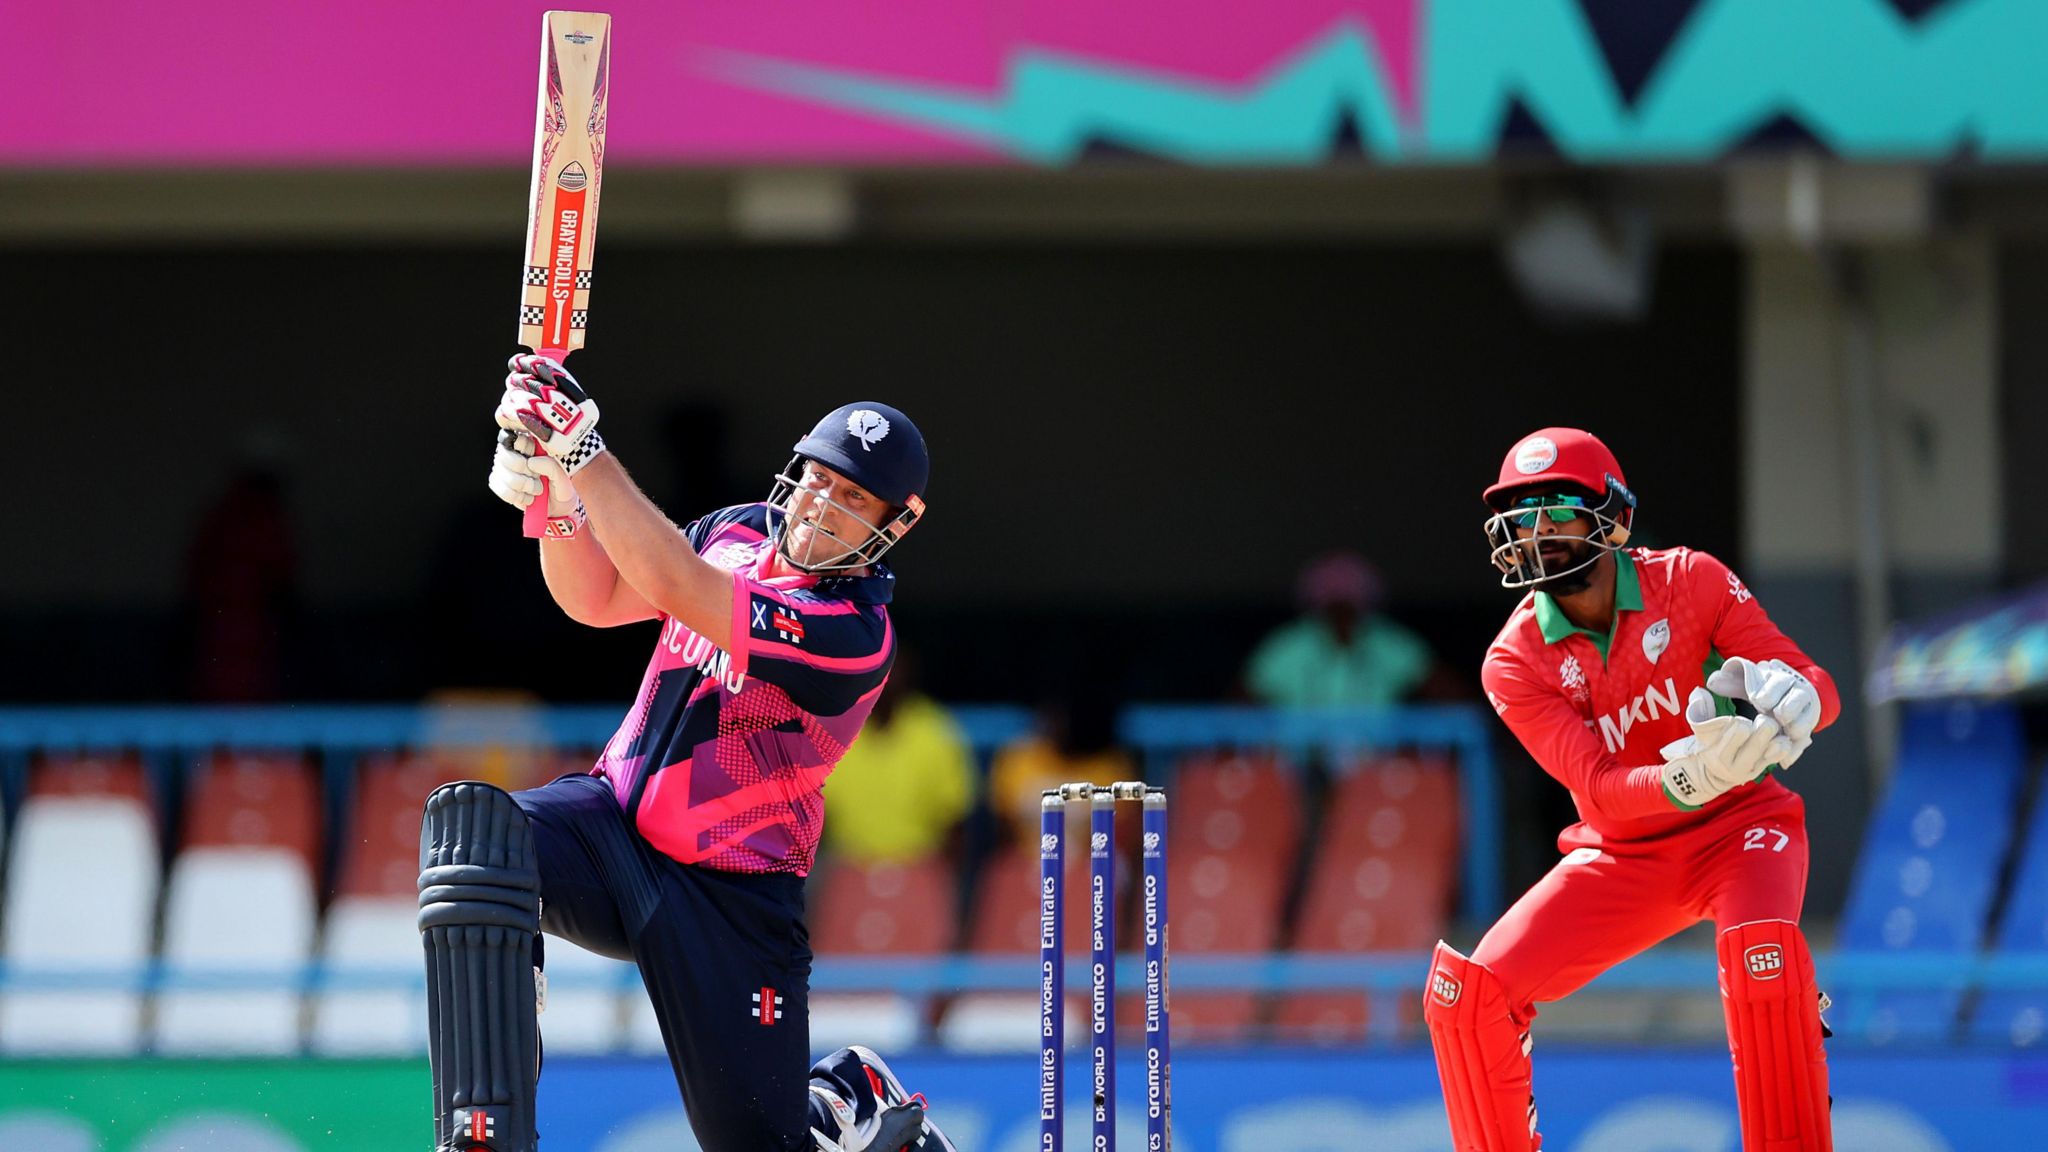 CRICKETScotland closes in on Super 8s with a confident win. Oman eliminated Caribbean Times